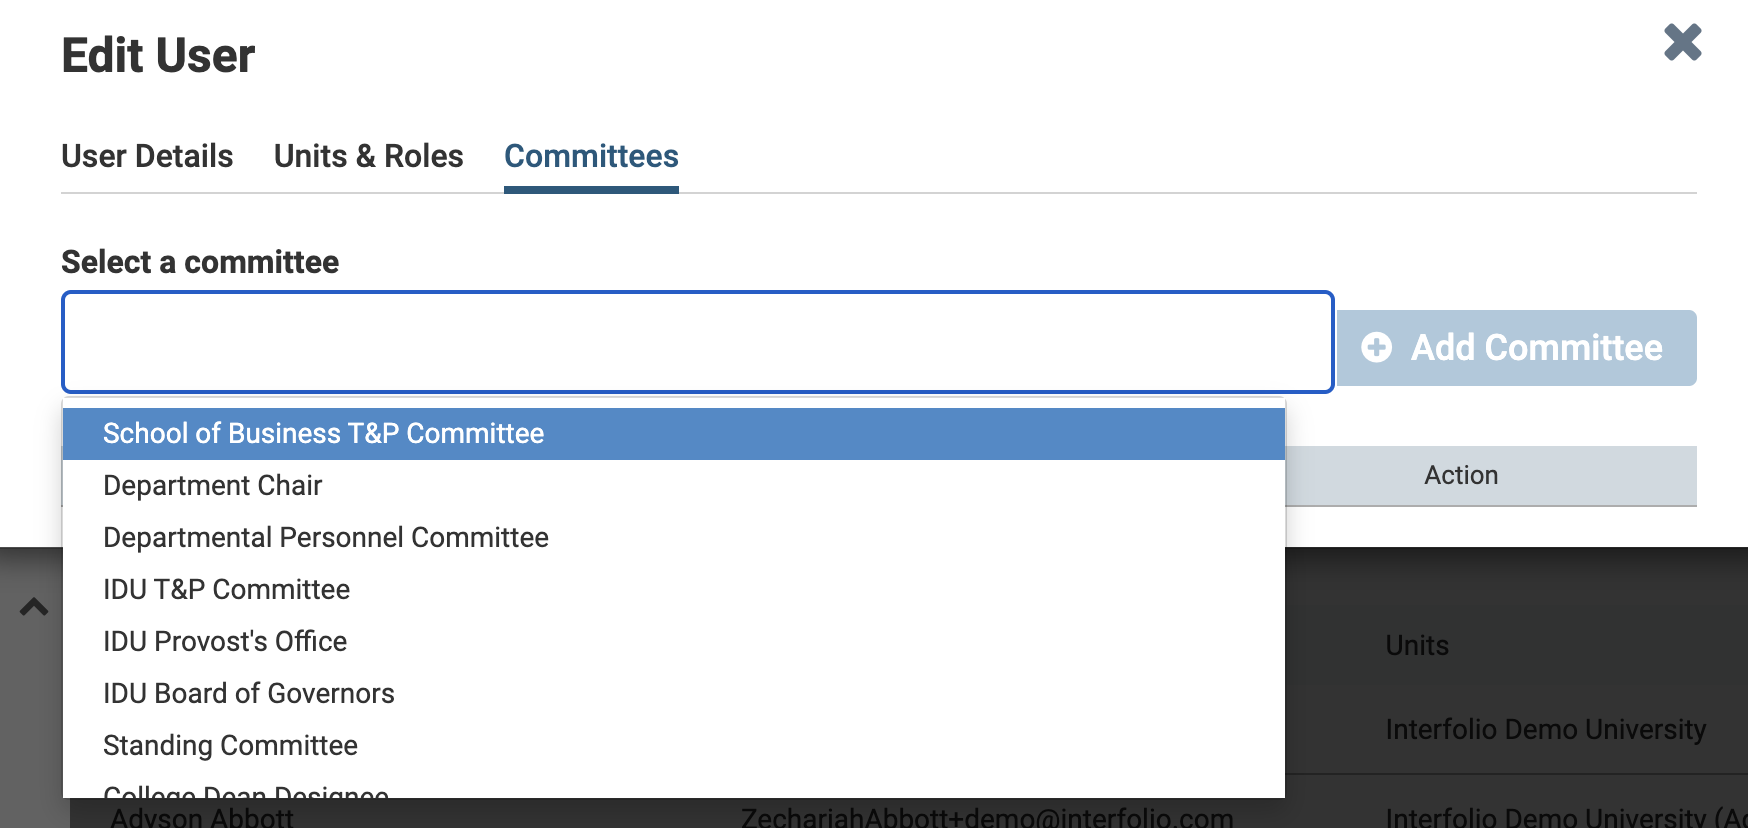 Edit User section with Select a committee dropdown shown